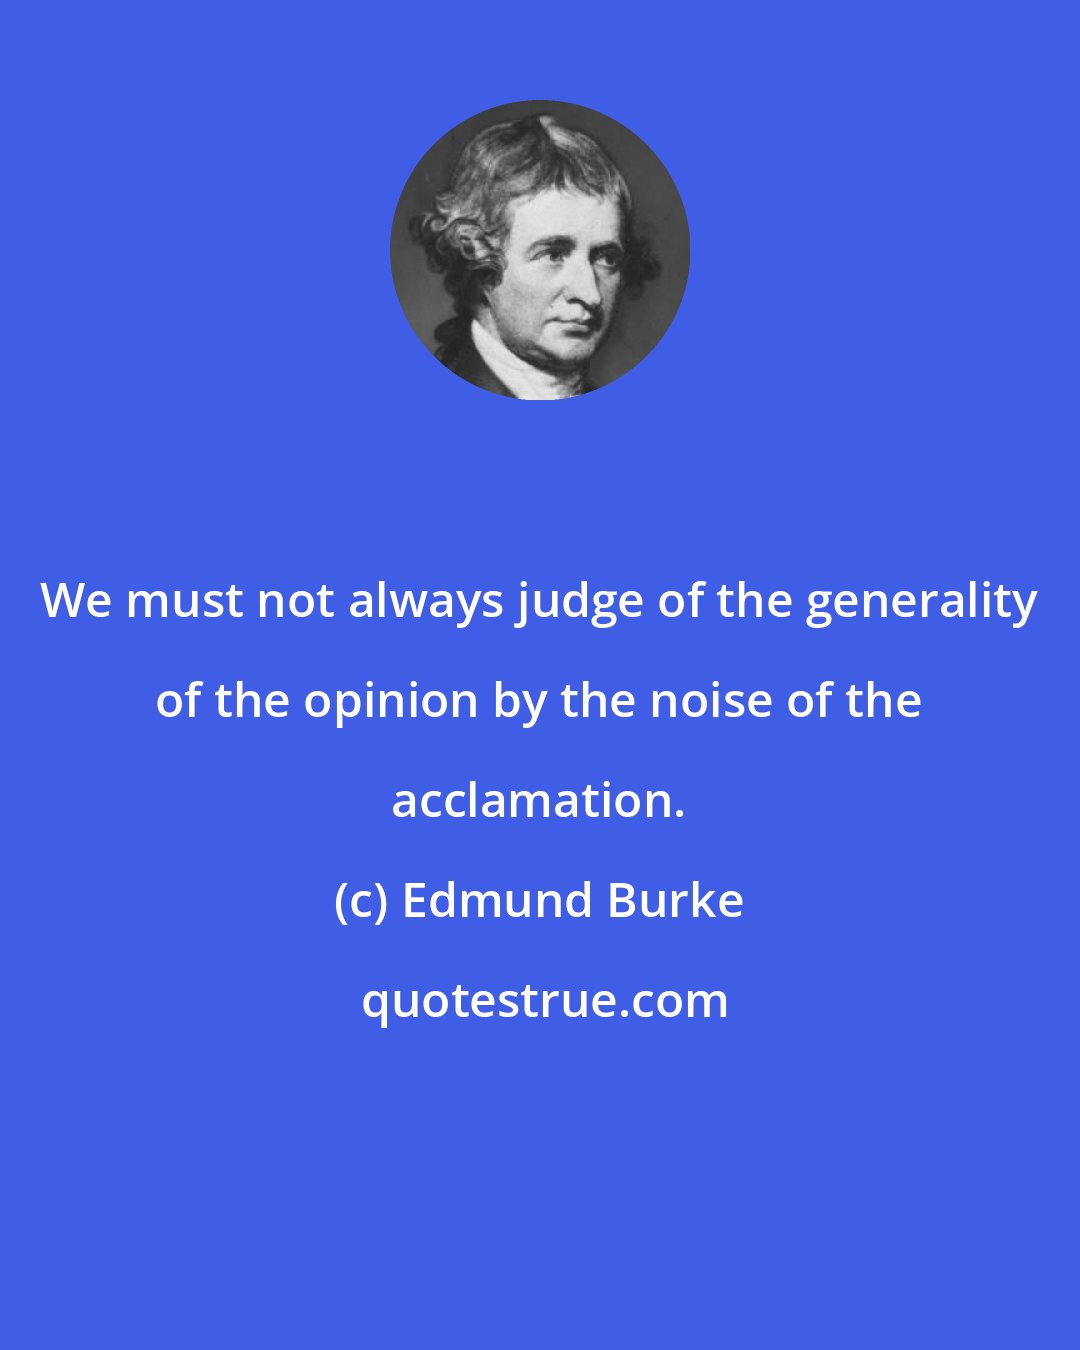 Edmund Burke: We must not always judge of the generality of the opinion by the noise of the acclamation.